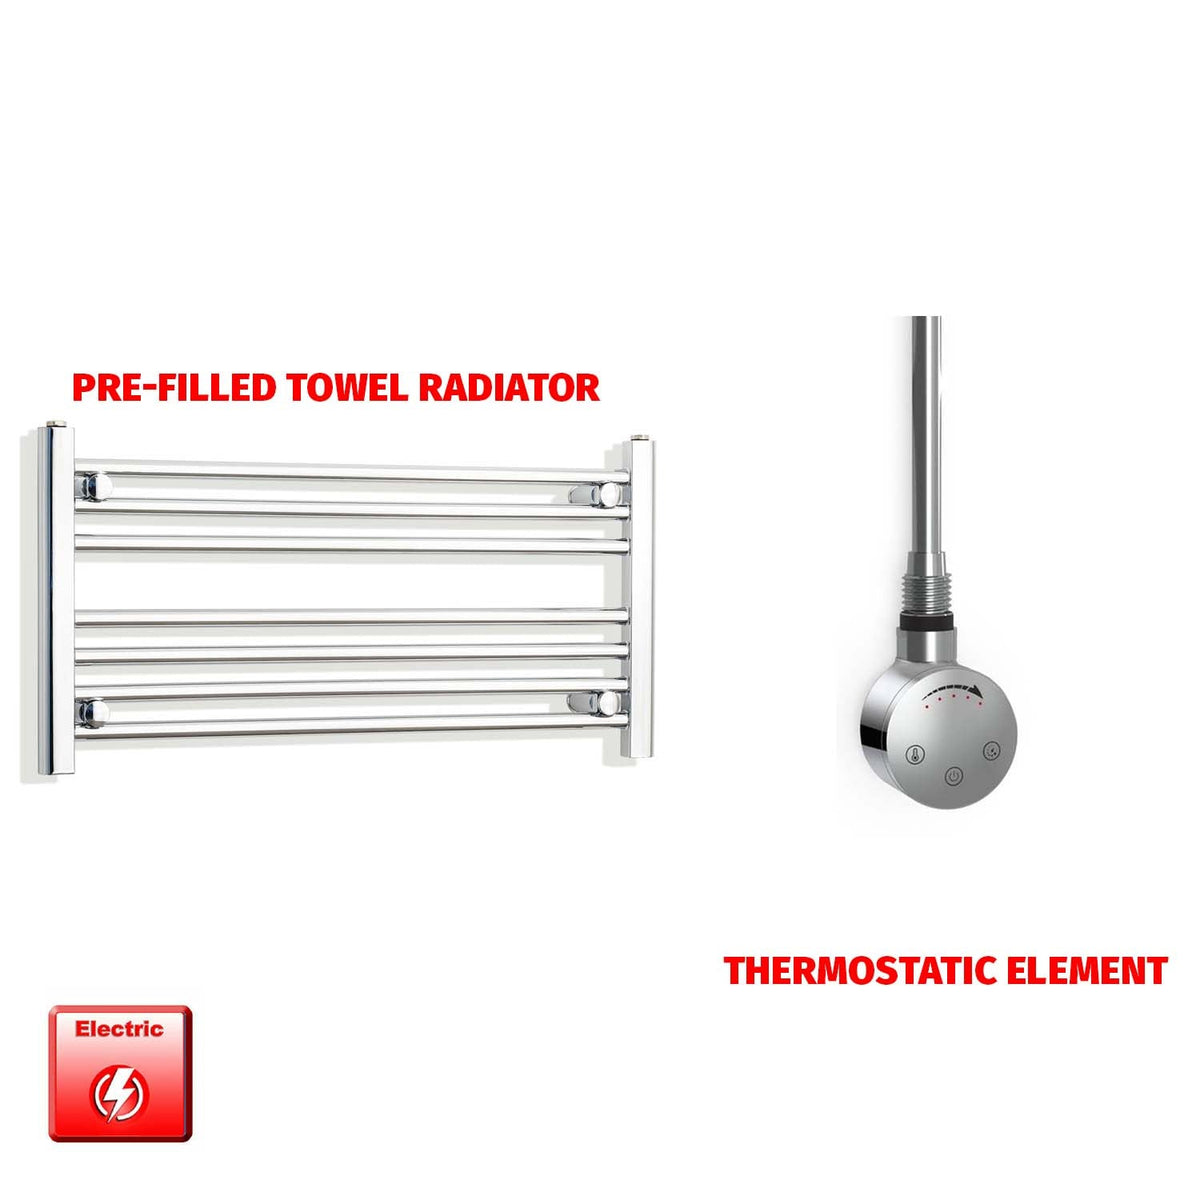 400 x 800 Pre-Filled Electric Heated Towel Radiator Straight Chrome SMR Thermostatic element no timer